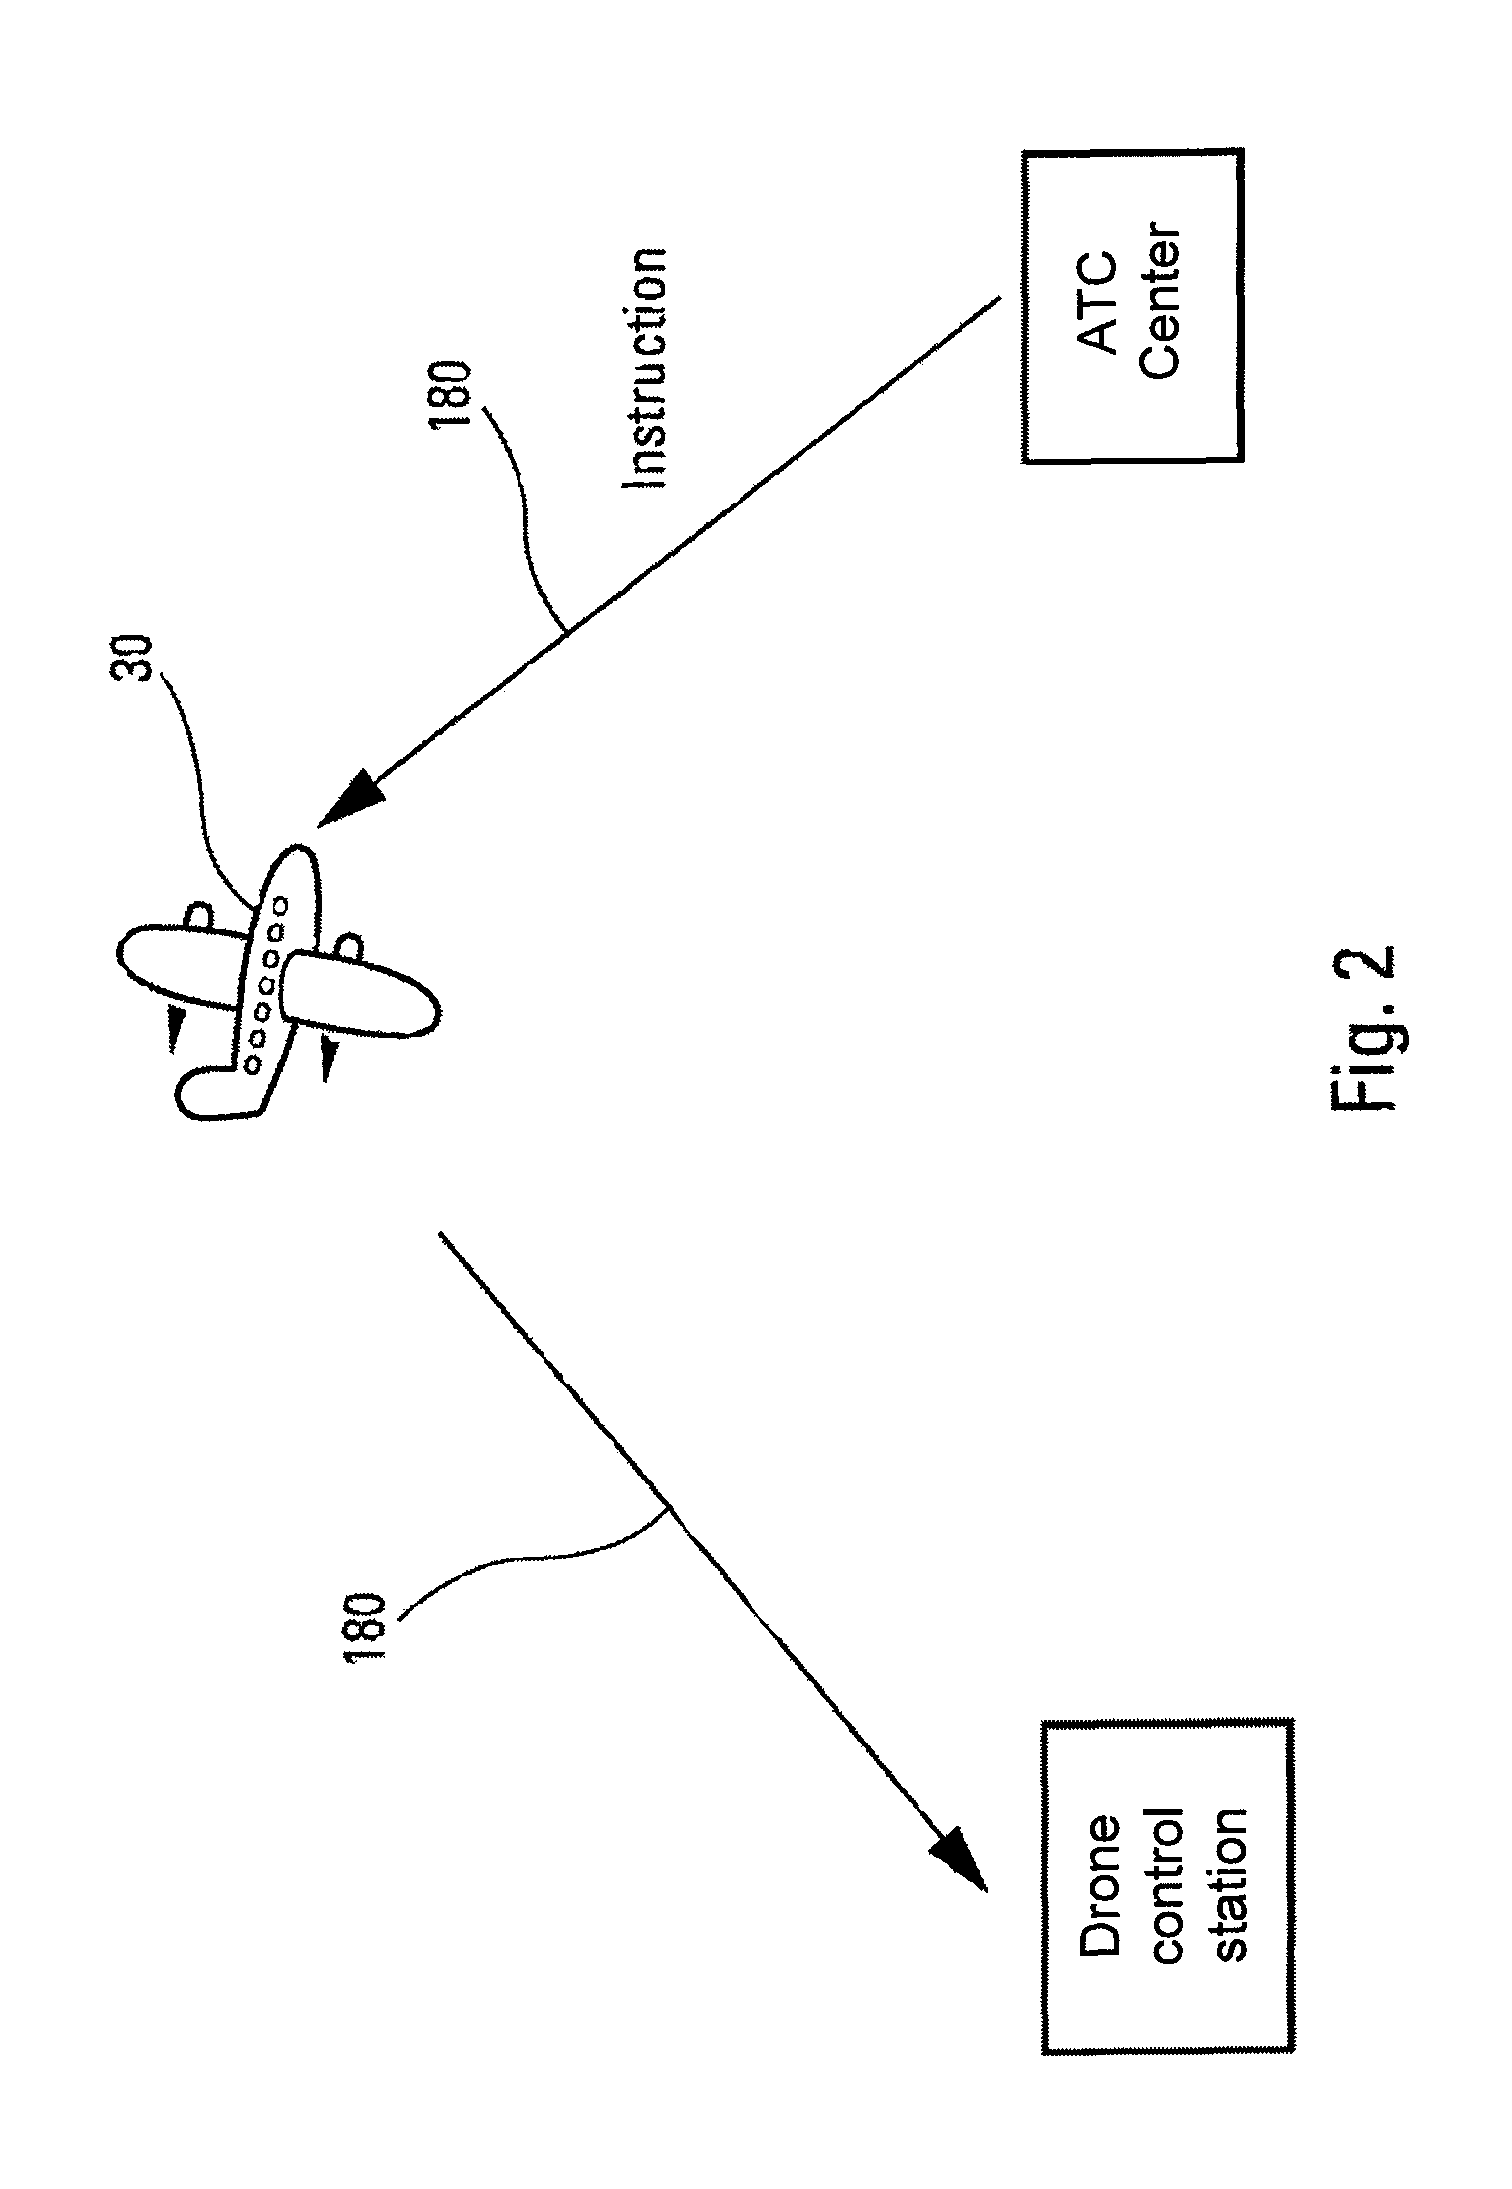 Device and method of automated construction of emergency flight path for aircraft